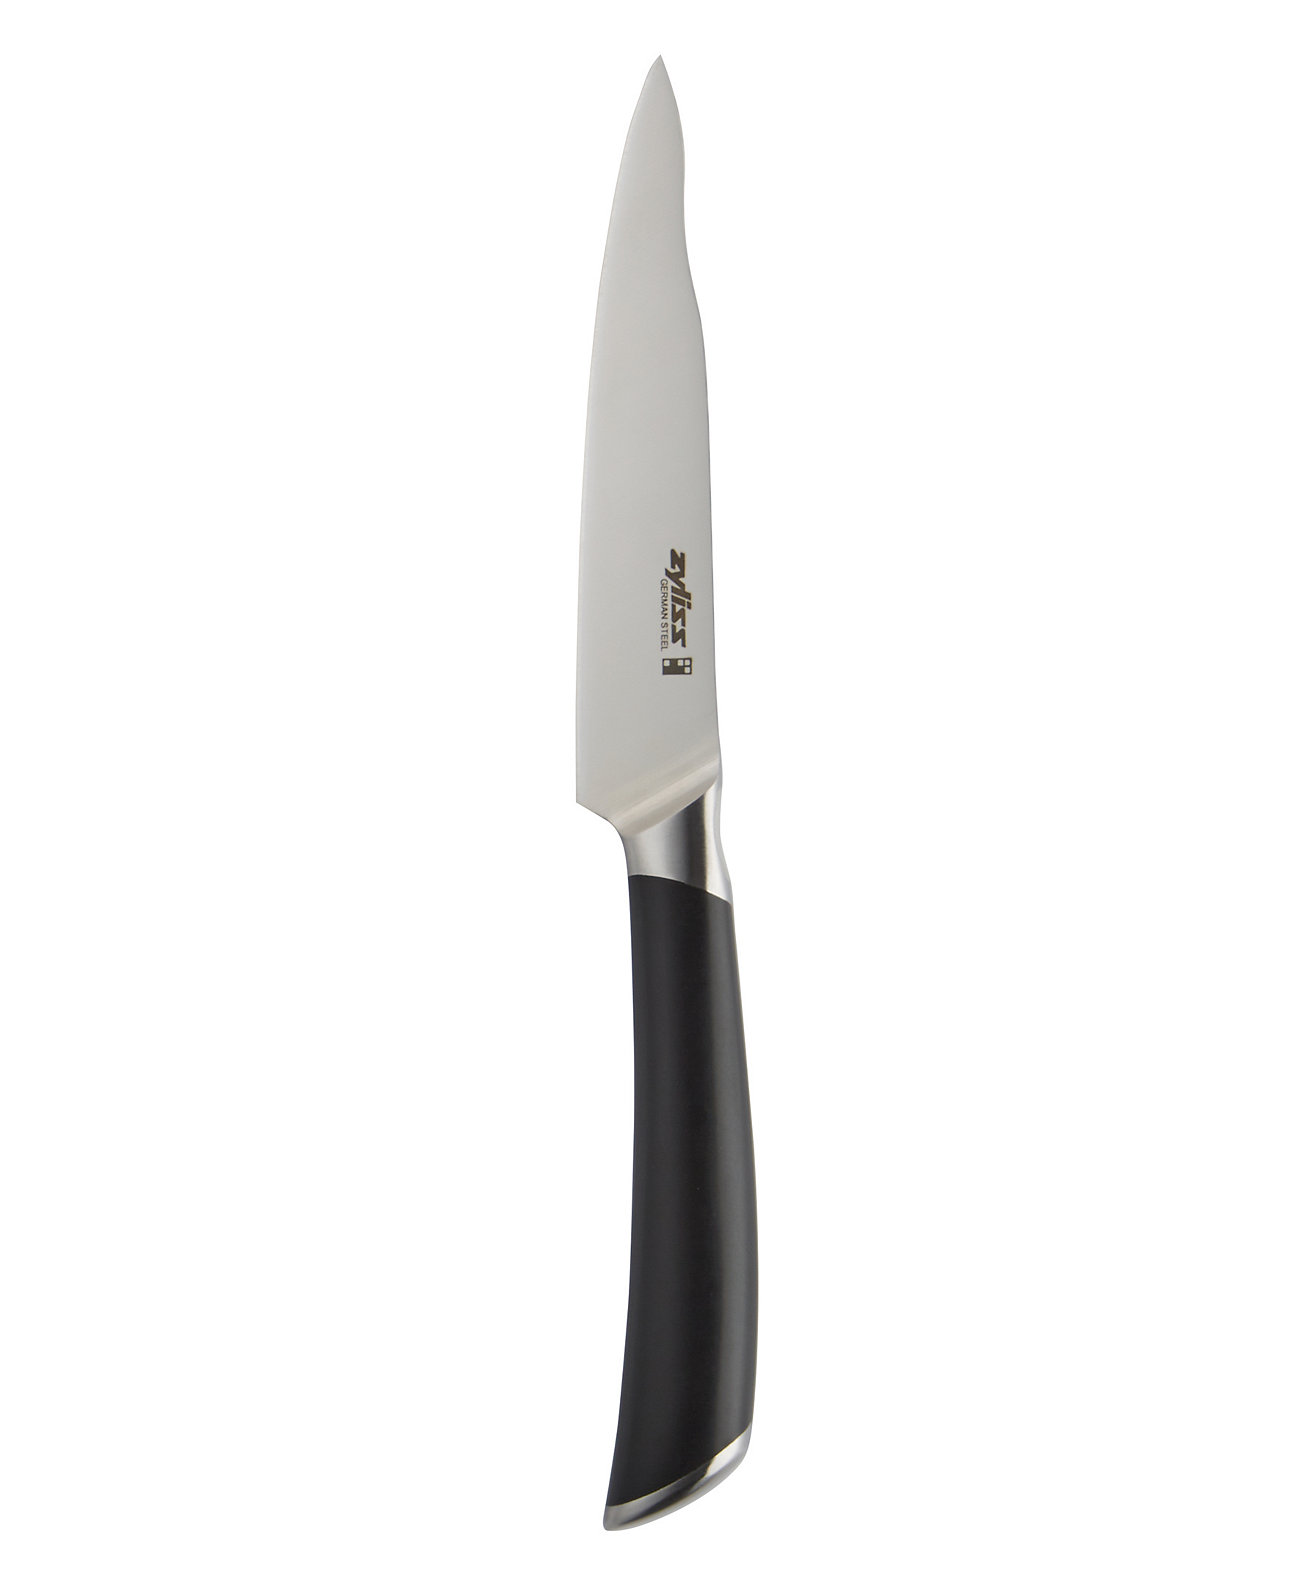 Comfort Stainless Steel Pro Paring Knife 4" Zyliss